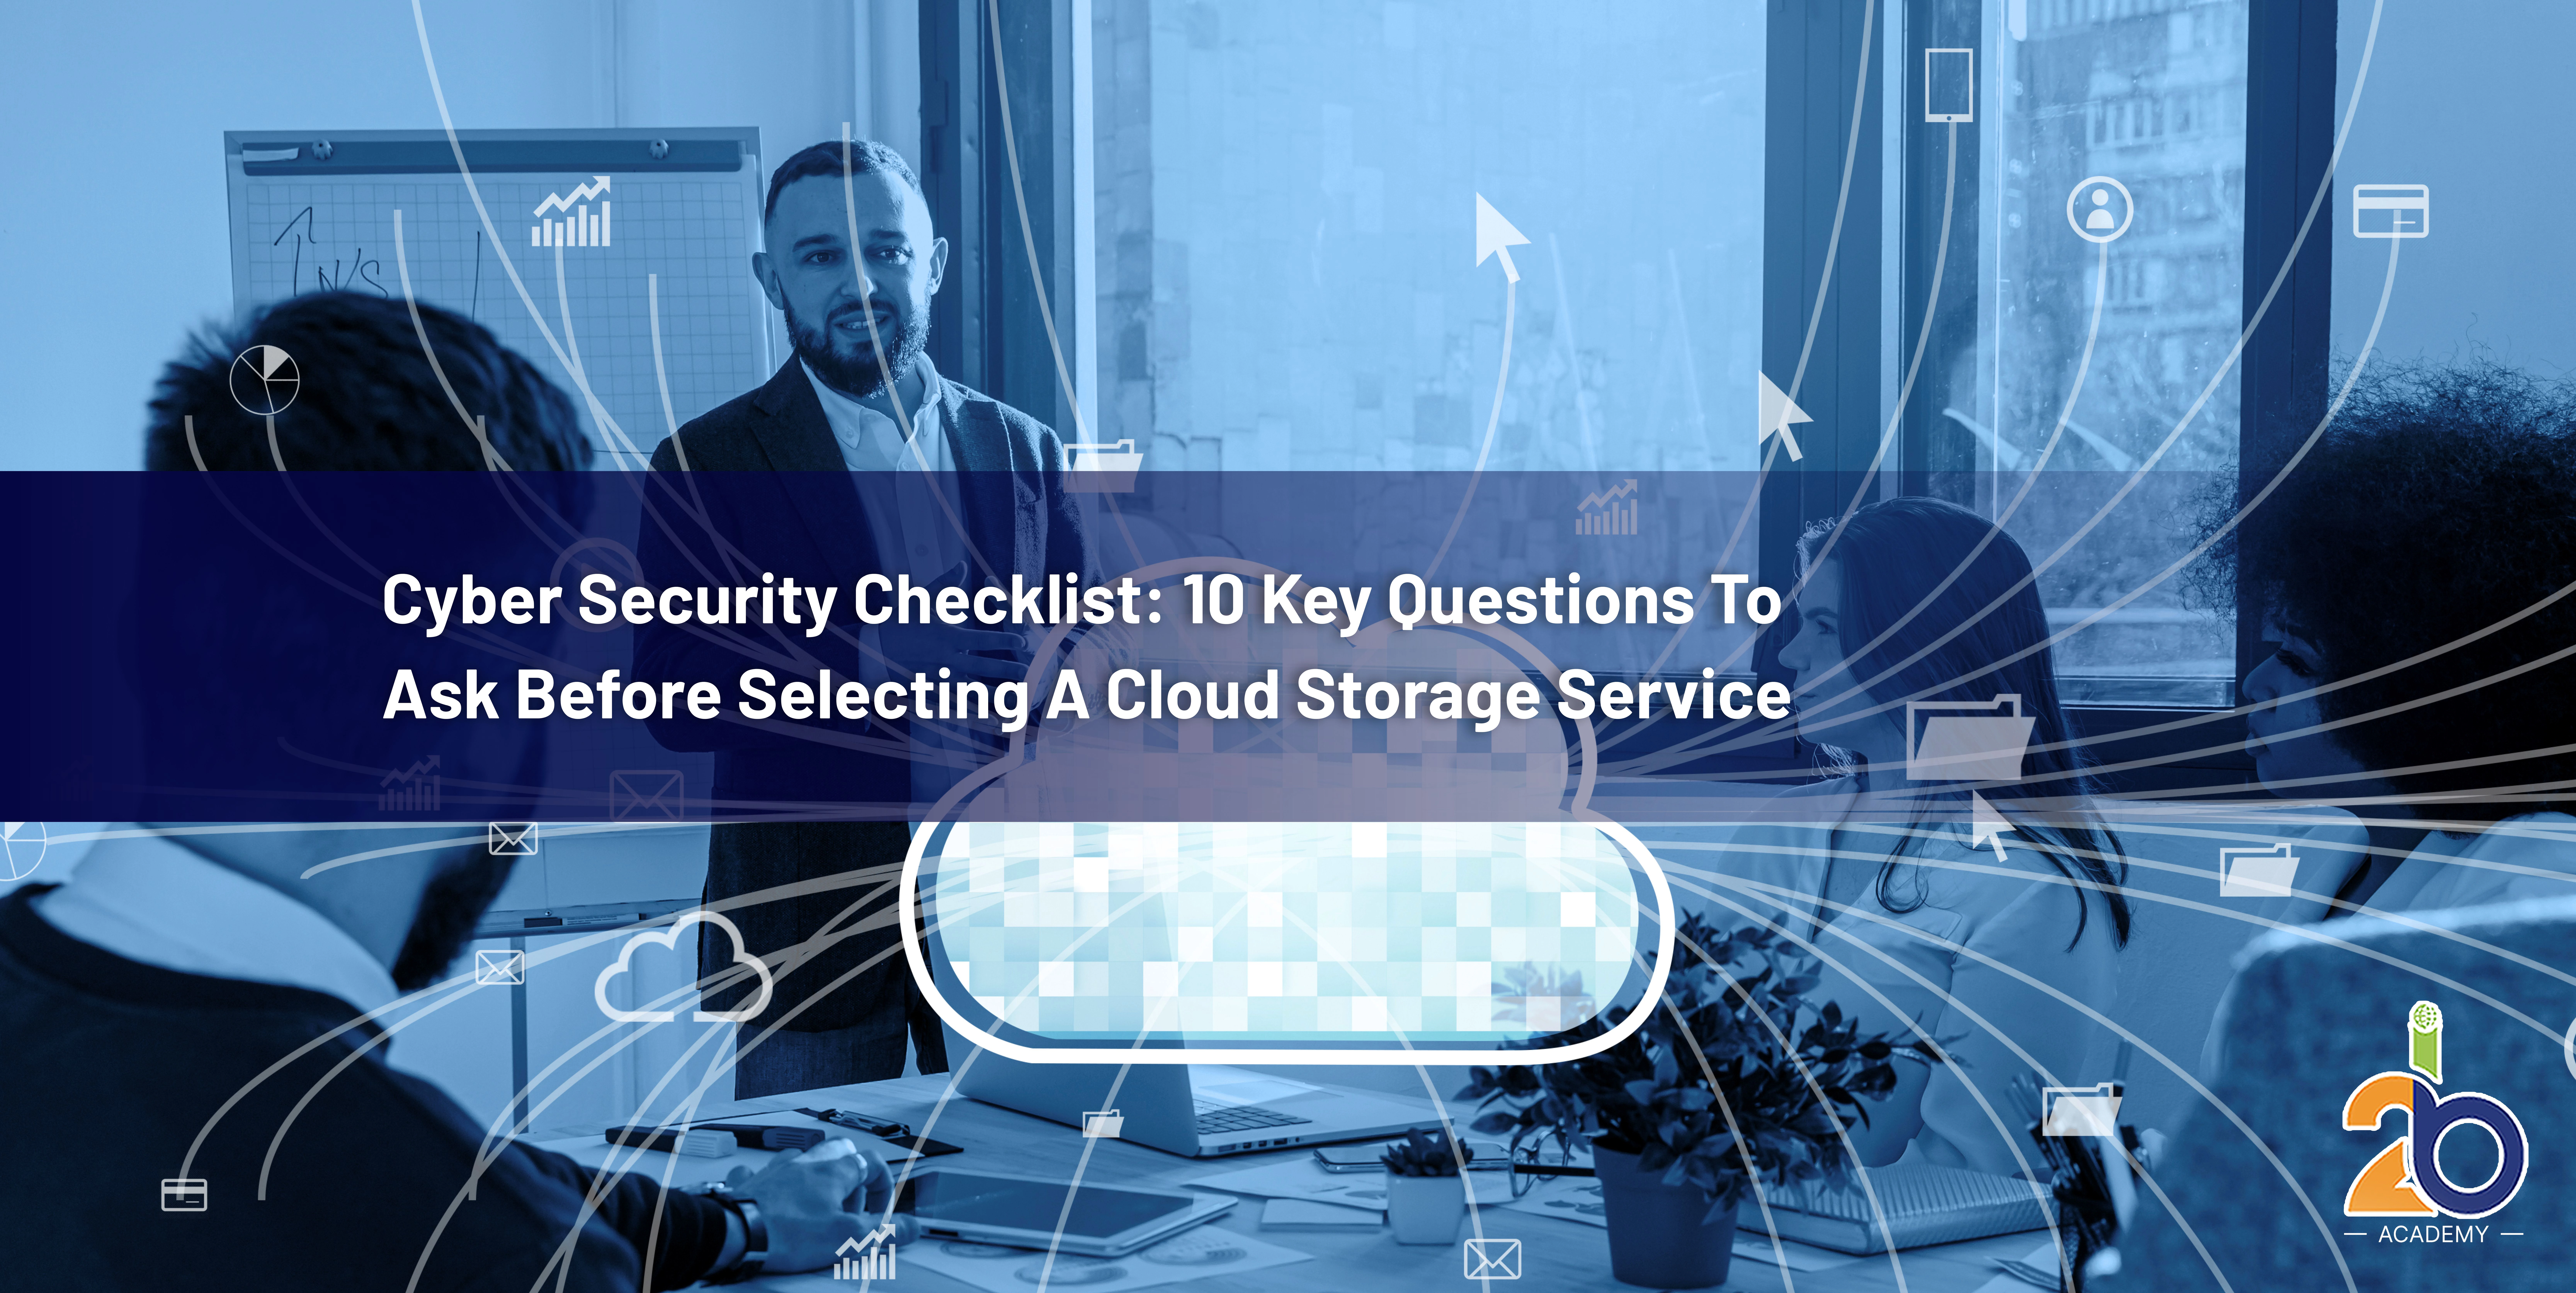 CYBER SECURITY CHECKLIST: 10 KEY QUESTIONS TO ASK BEFORE SELECTING A CLOUD STORAGE SERVICE